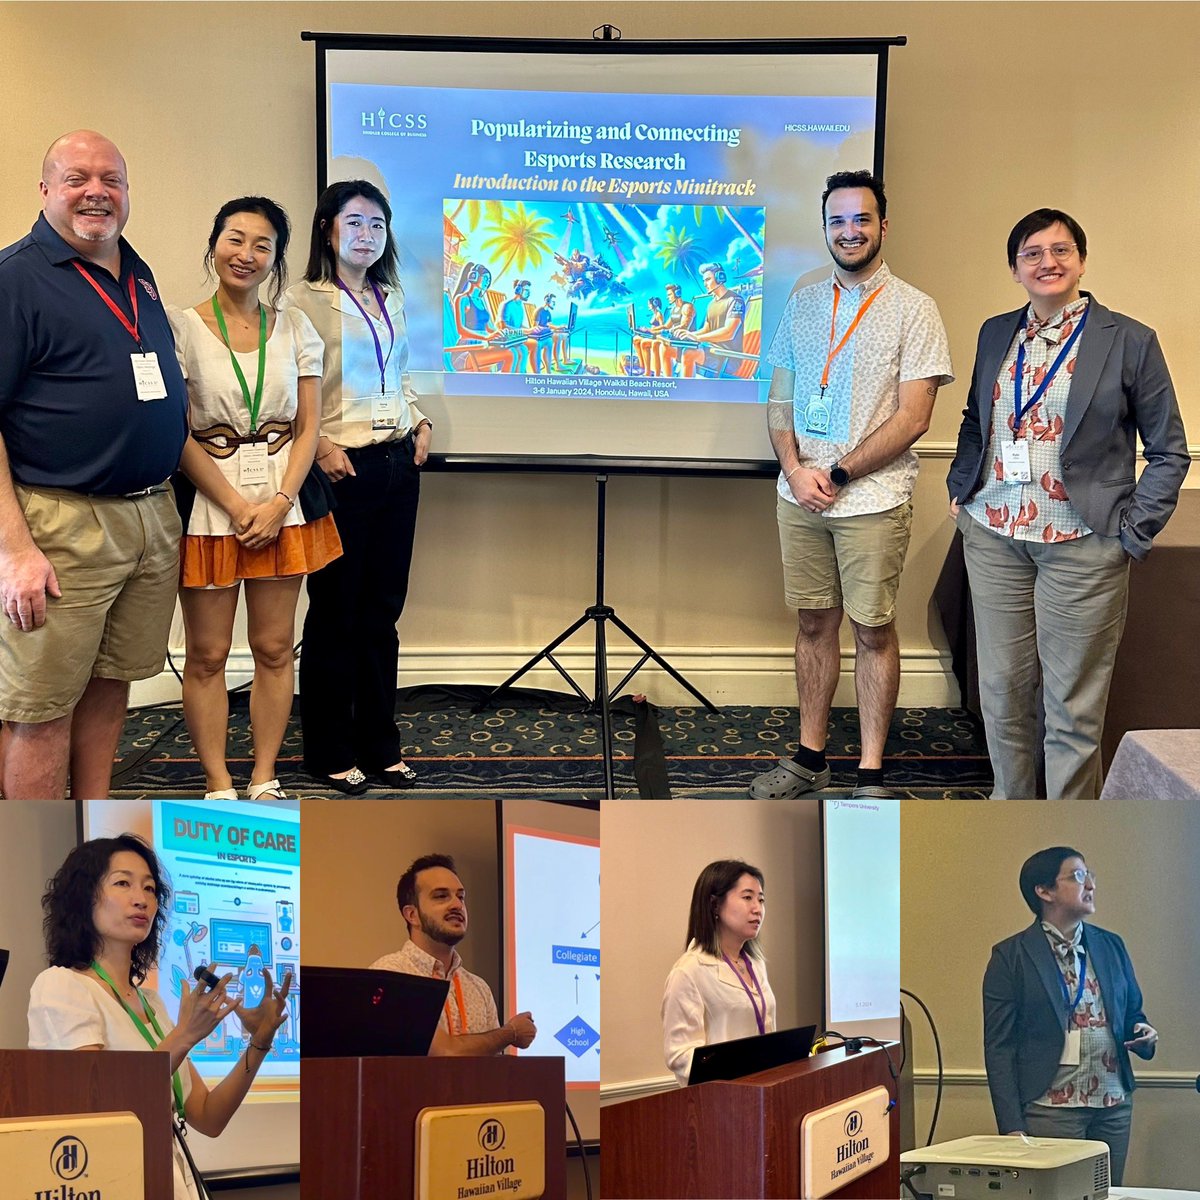 Thank you to all the #hicss #esports minitrack presenters for insightful research! @sayhello2rome @Fisack Hong Chen @KyleNolla and @tyrealqian
Track Co-Chairs:
@piotrsiuda @BehnkeMaciej #research #esportseducation @egaming_esports Looking forward to next year!